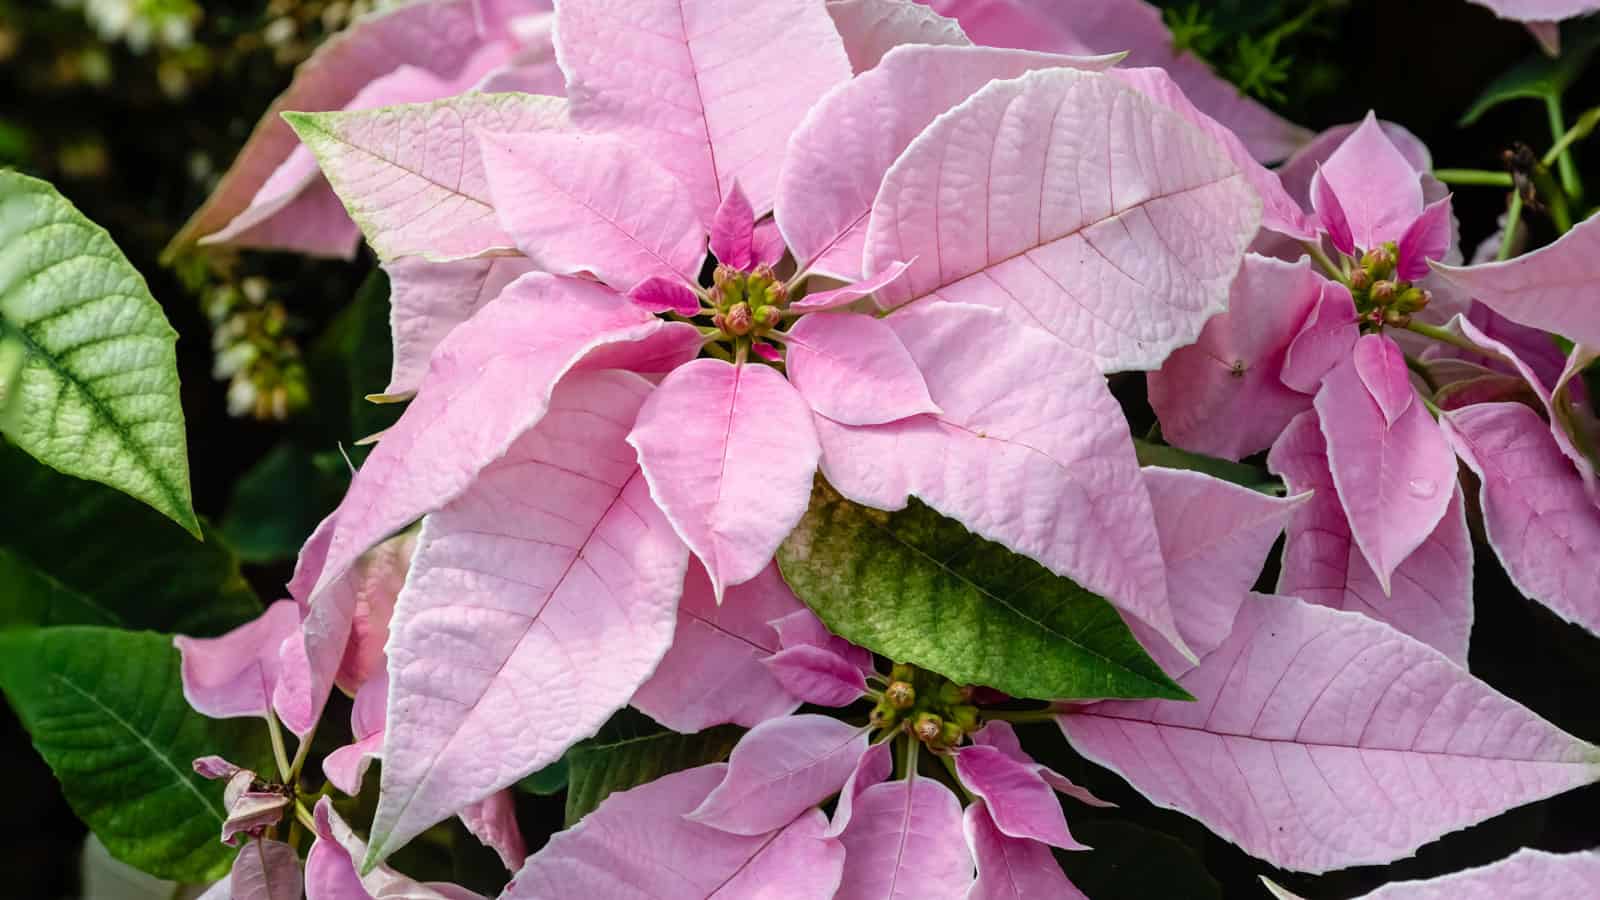 Gorgeous bright pink leaves of a Pricenttia pink poinsettia